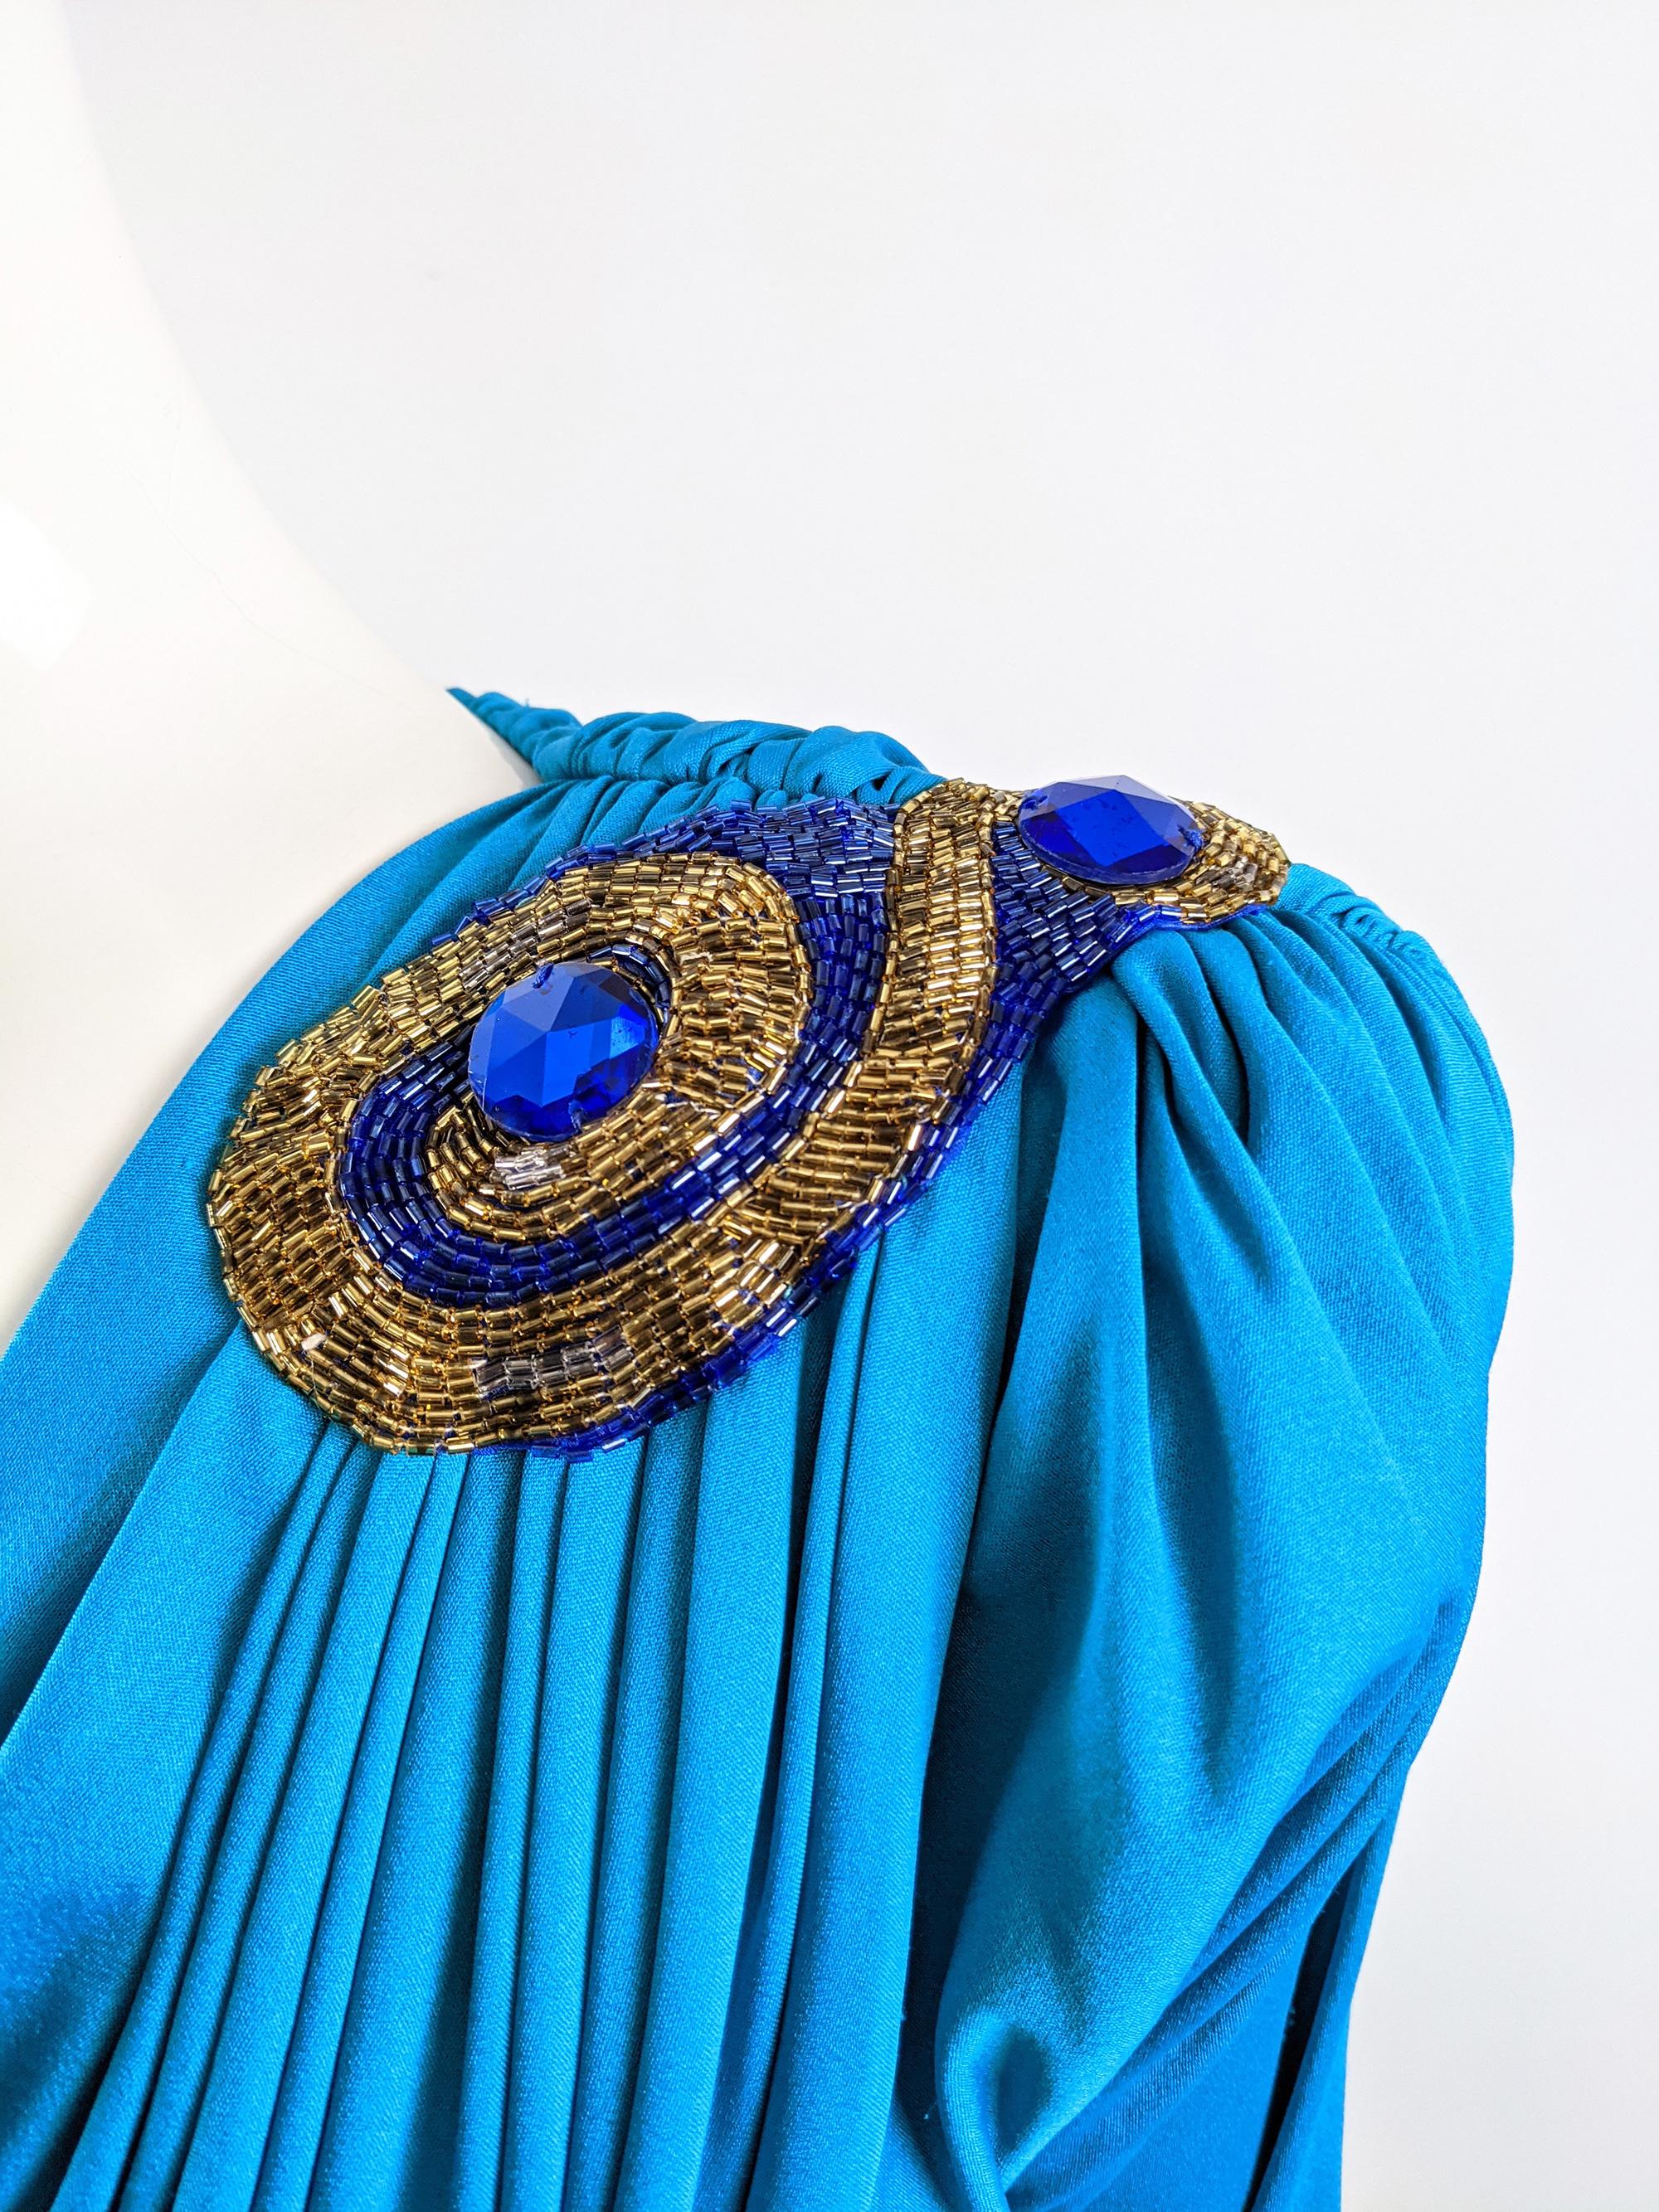 Tadashi Vintage 80s Blue Slinky Draped Jersey Gold Sequin Shoulder Party Dress In Good Condition For Sale In Doncaster, South Yorkshire